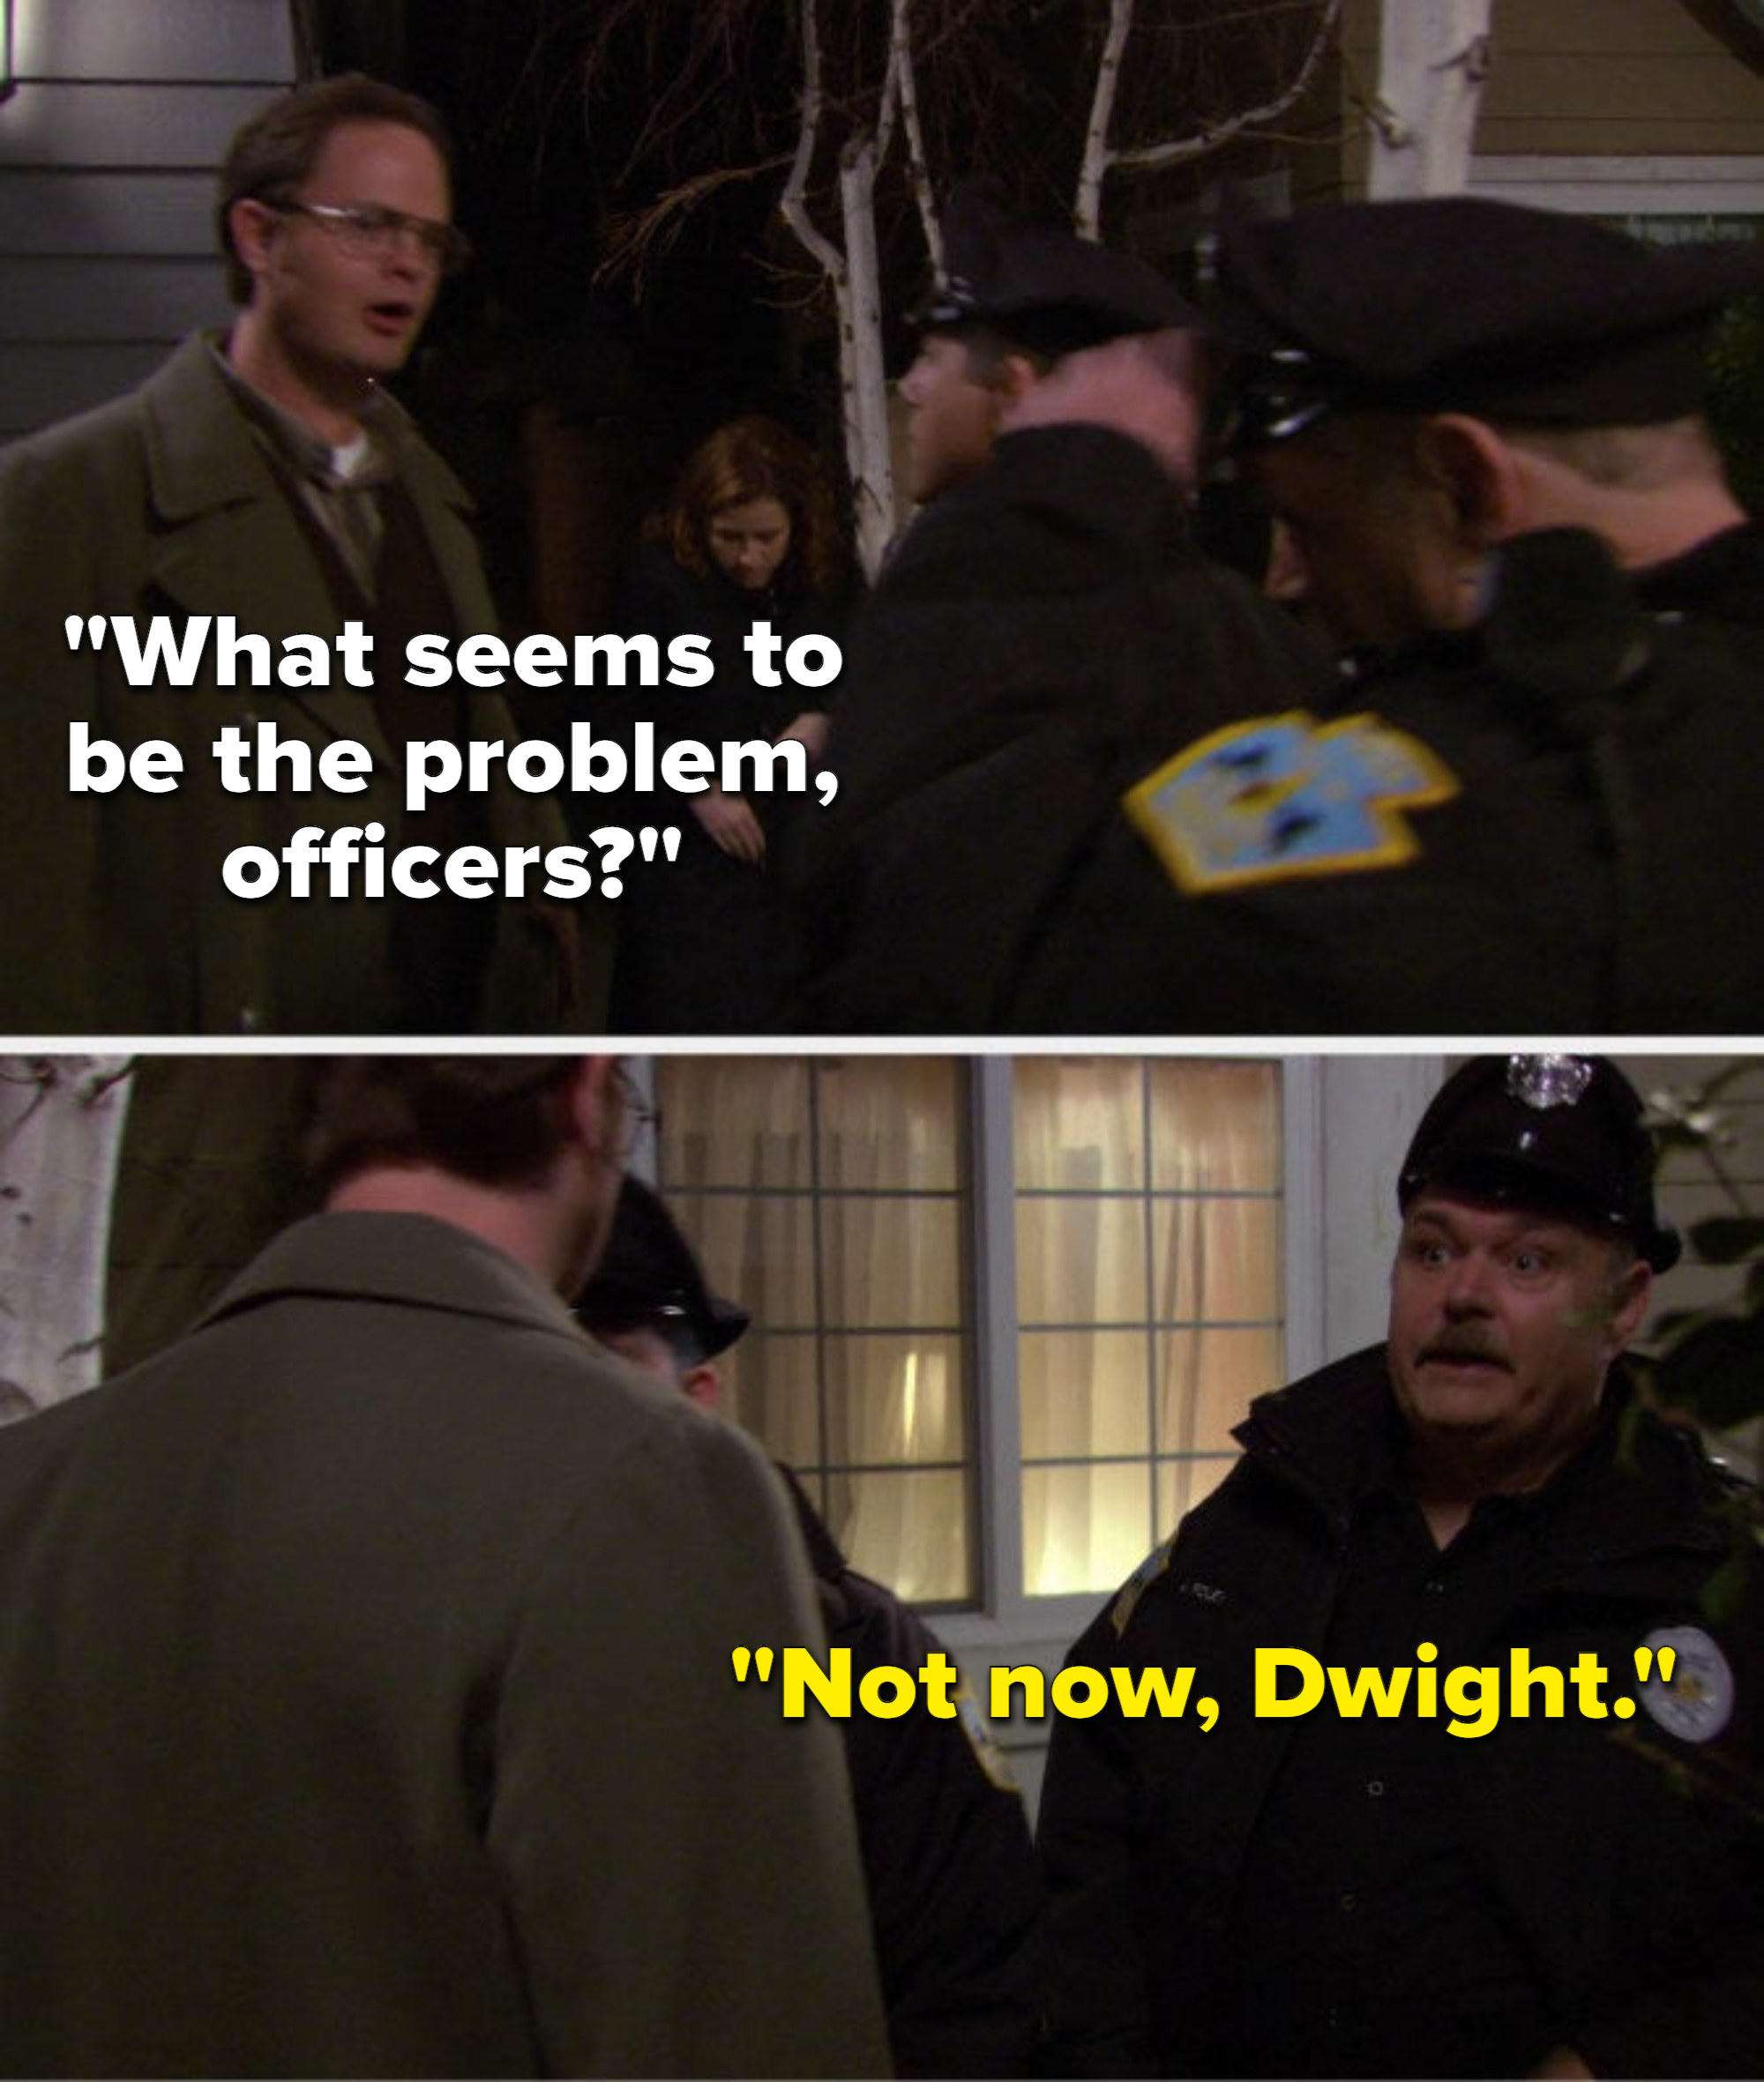 Dwight says, What seems to be the problem, officers, and one of the police officers says, Not now, Dwight